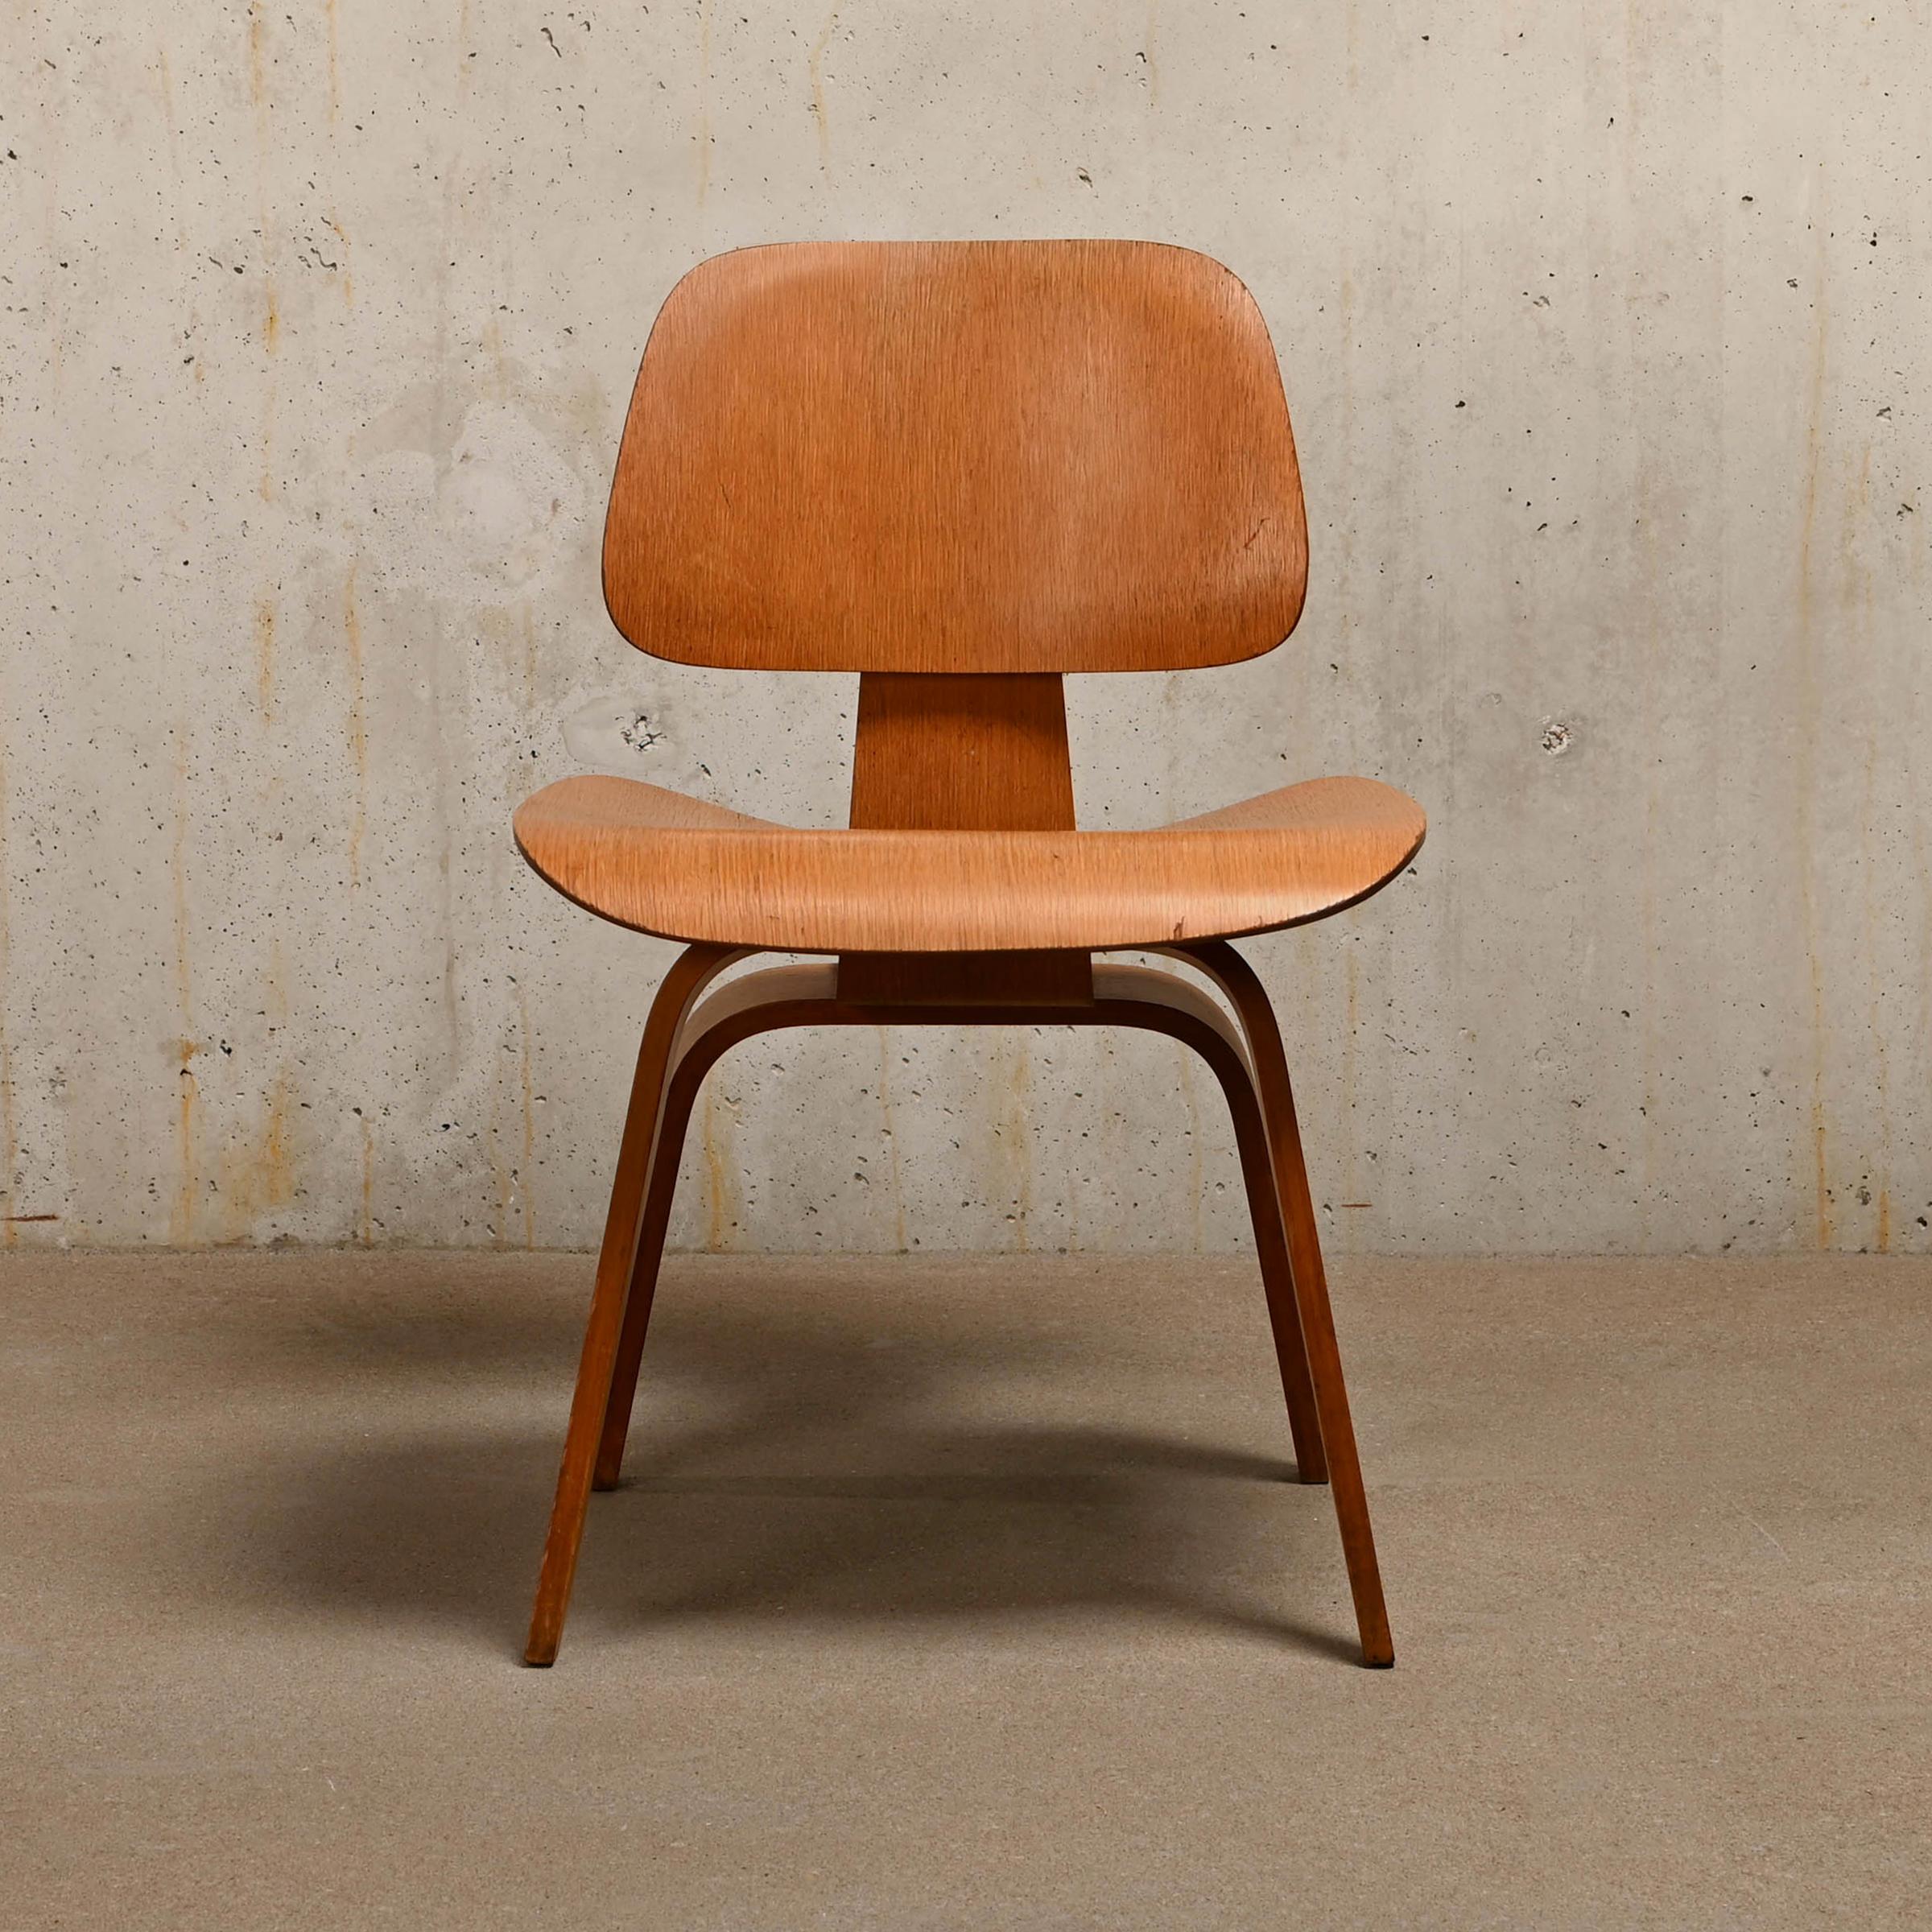 Iconic DCW dining side chair in Oak plywood. The oak veneer is in good condition with nice patina and minor user marks. Early Herman Miller production from September 1953 (4-2-5 screw configuration), just after Herman Miller took over production